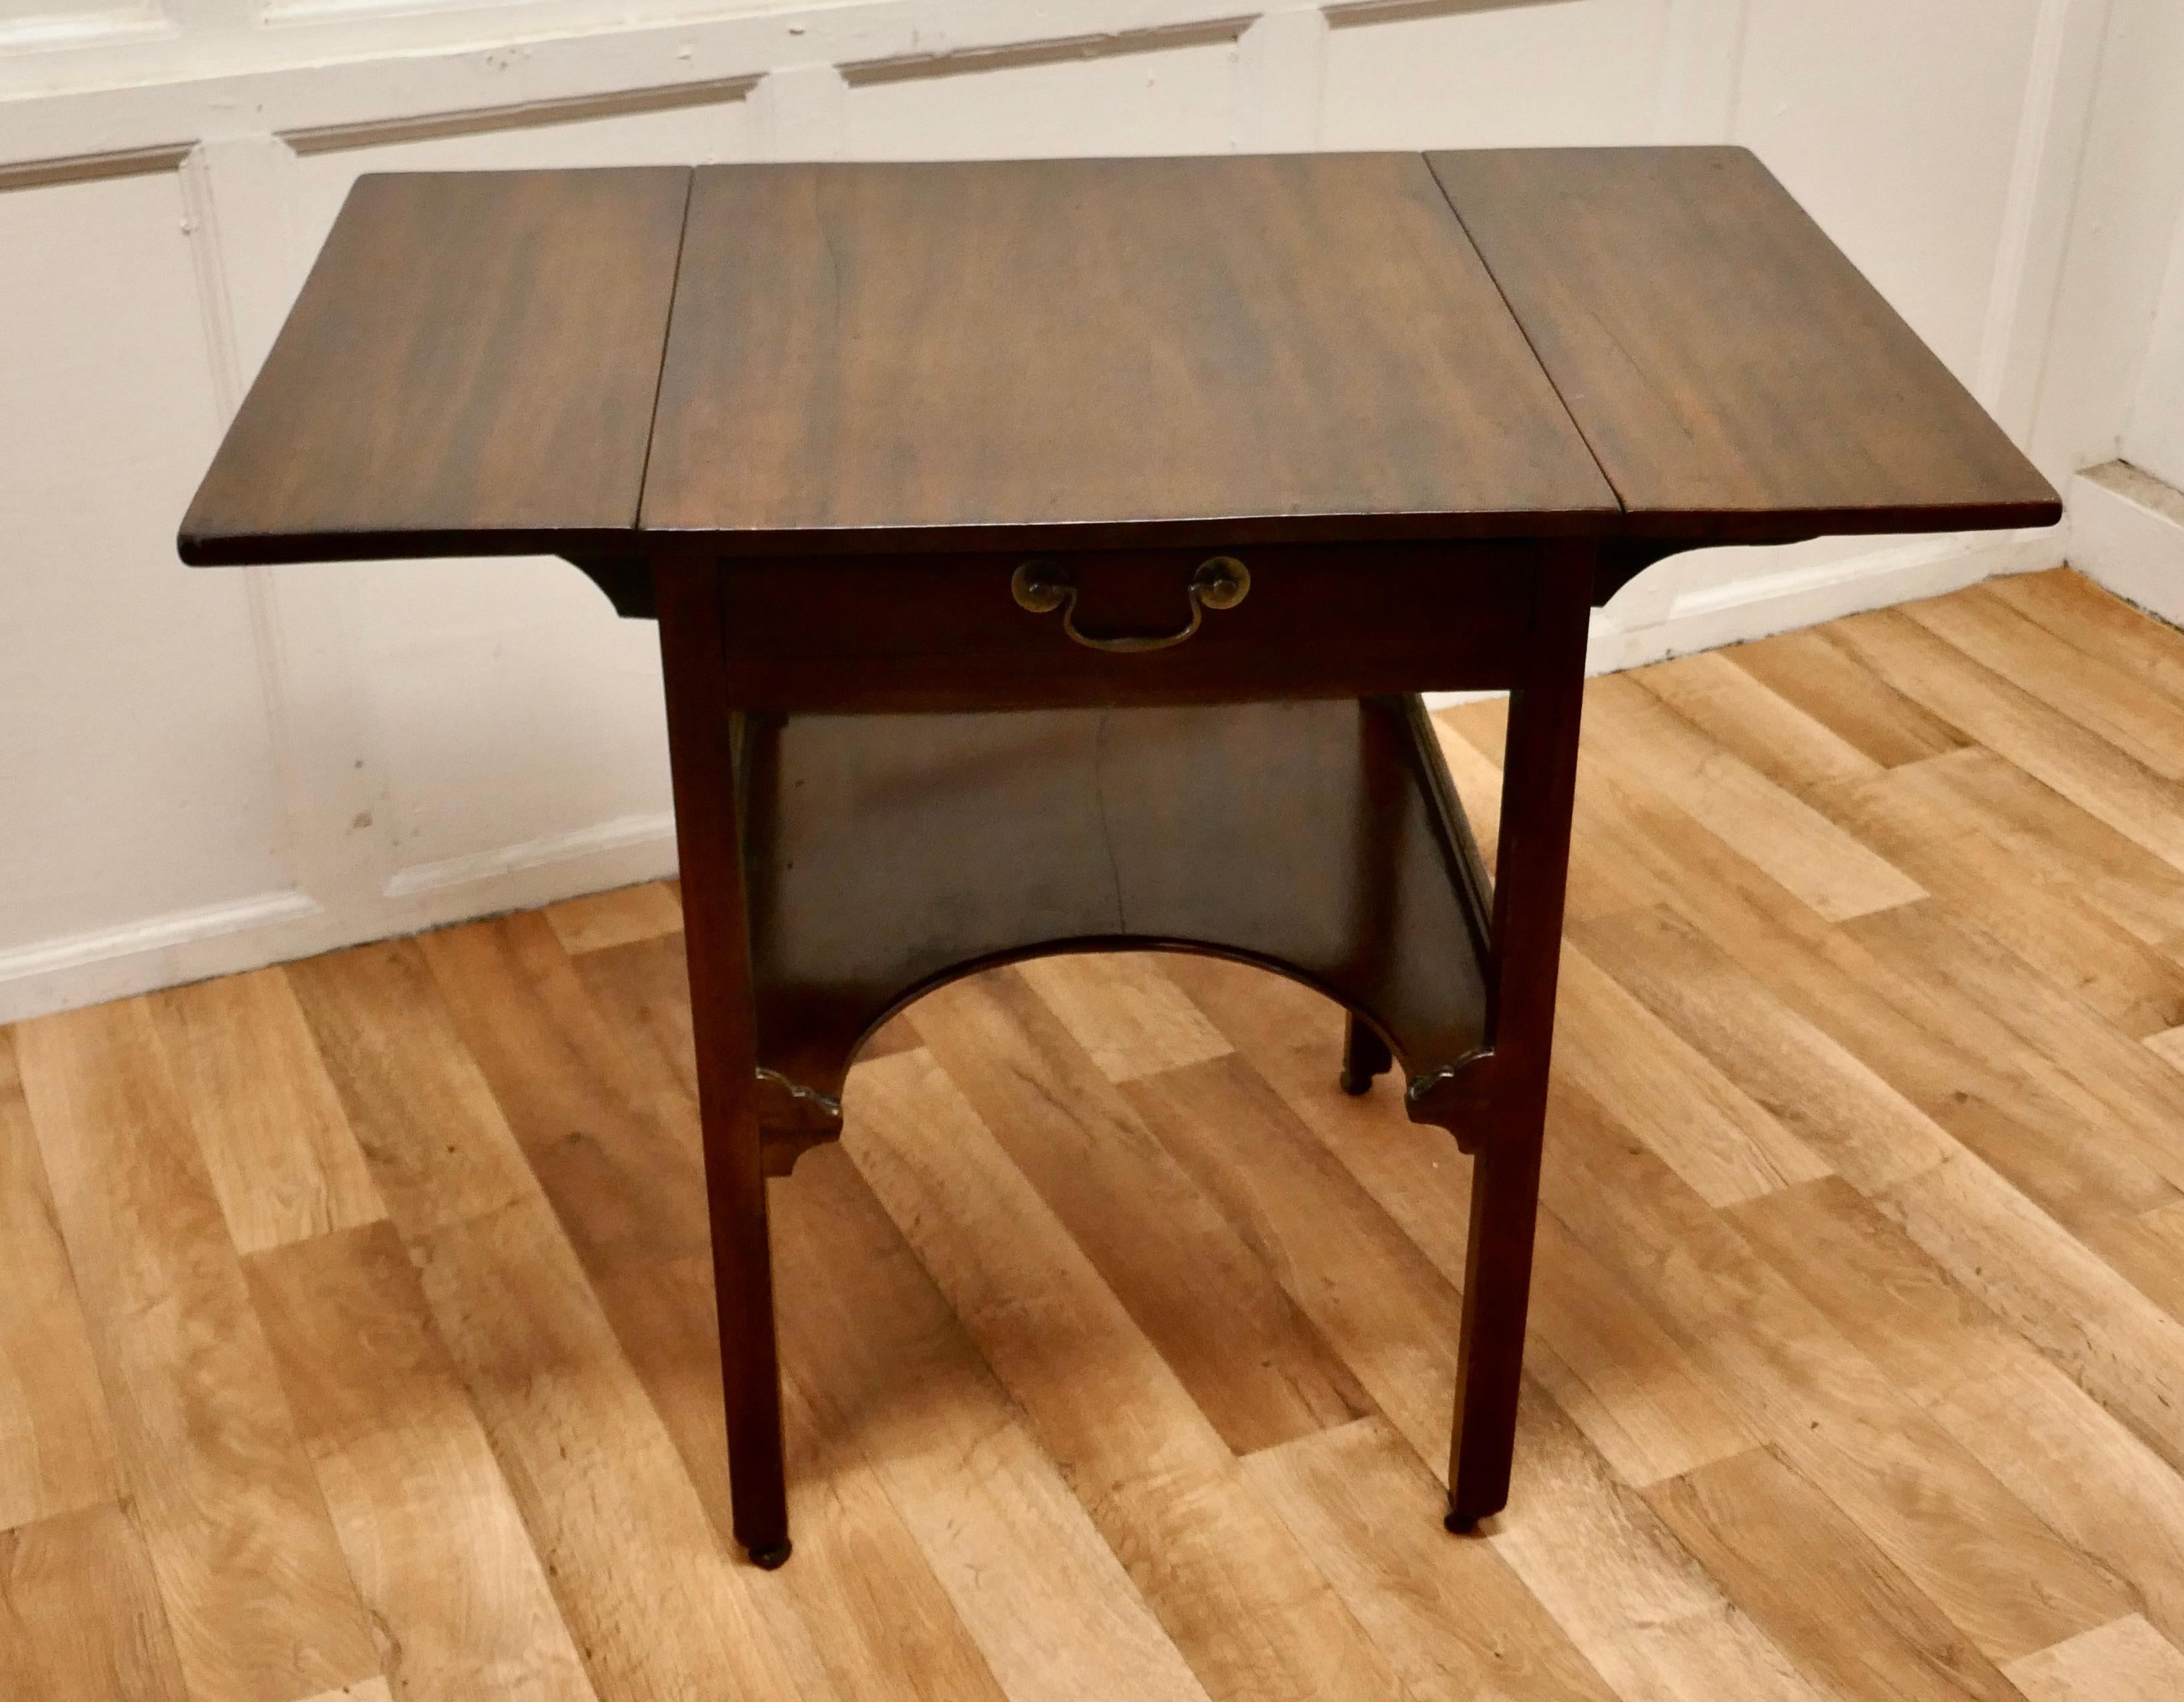 Regency Bonheur de Jour or Ladies Writing Desk

This is a rare piece indeed has a drop leaf in each side and a drawer to the front, the table has an undertier which has a deep kneehole, the reason for this being so large is to allow the user who